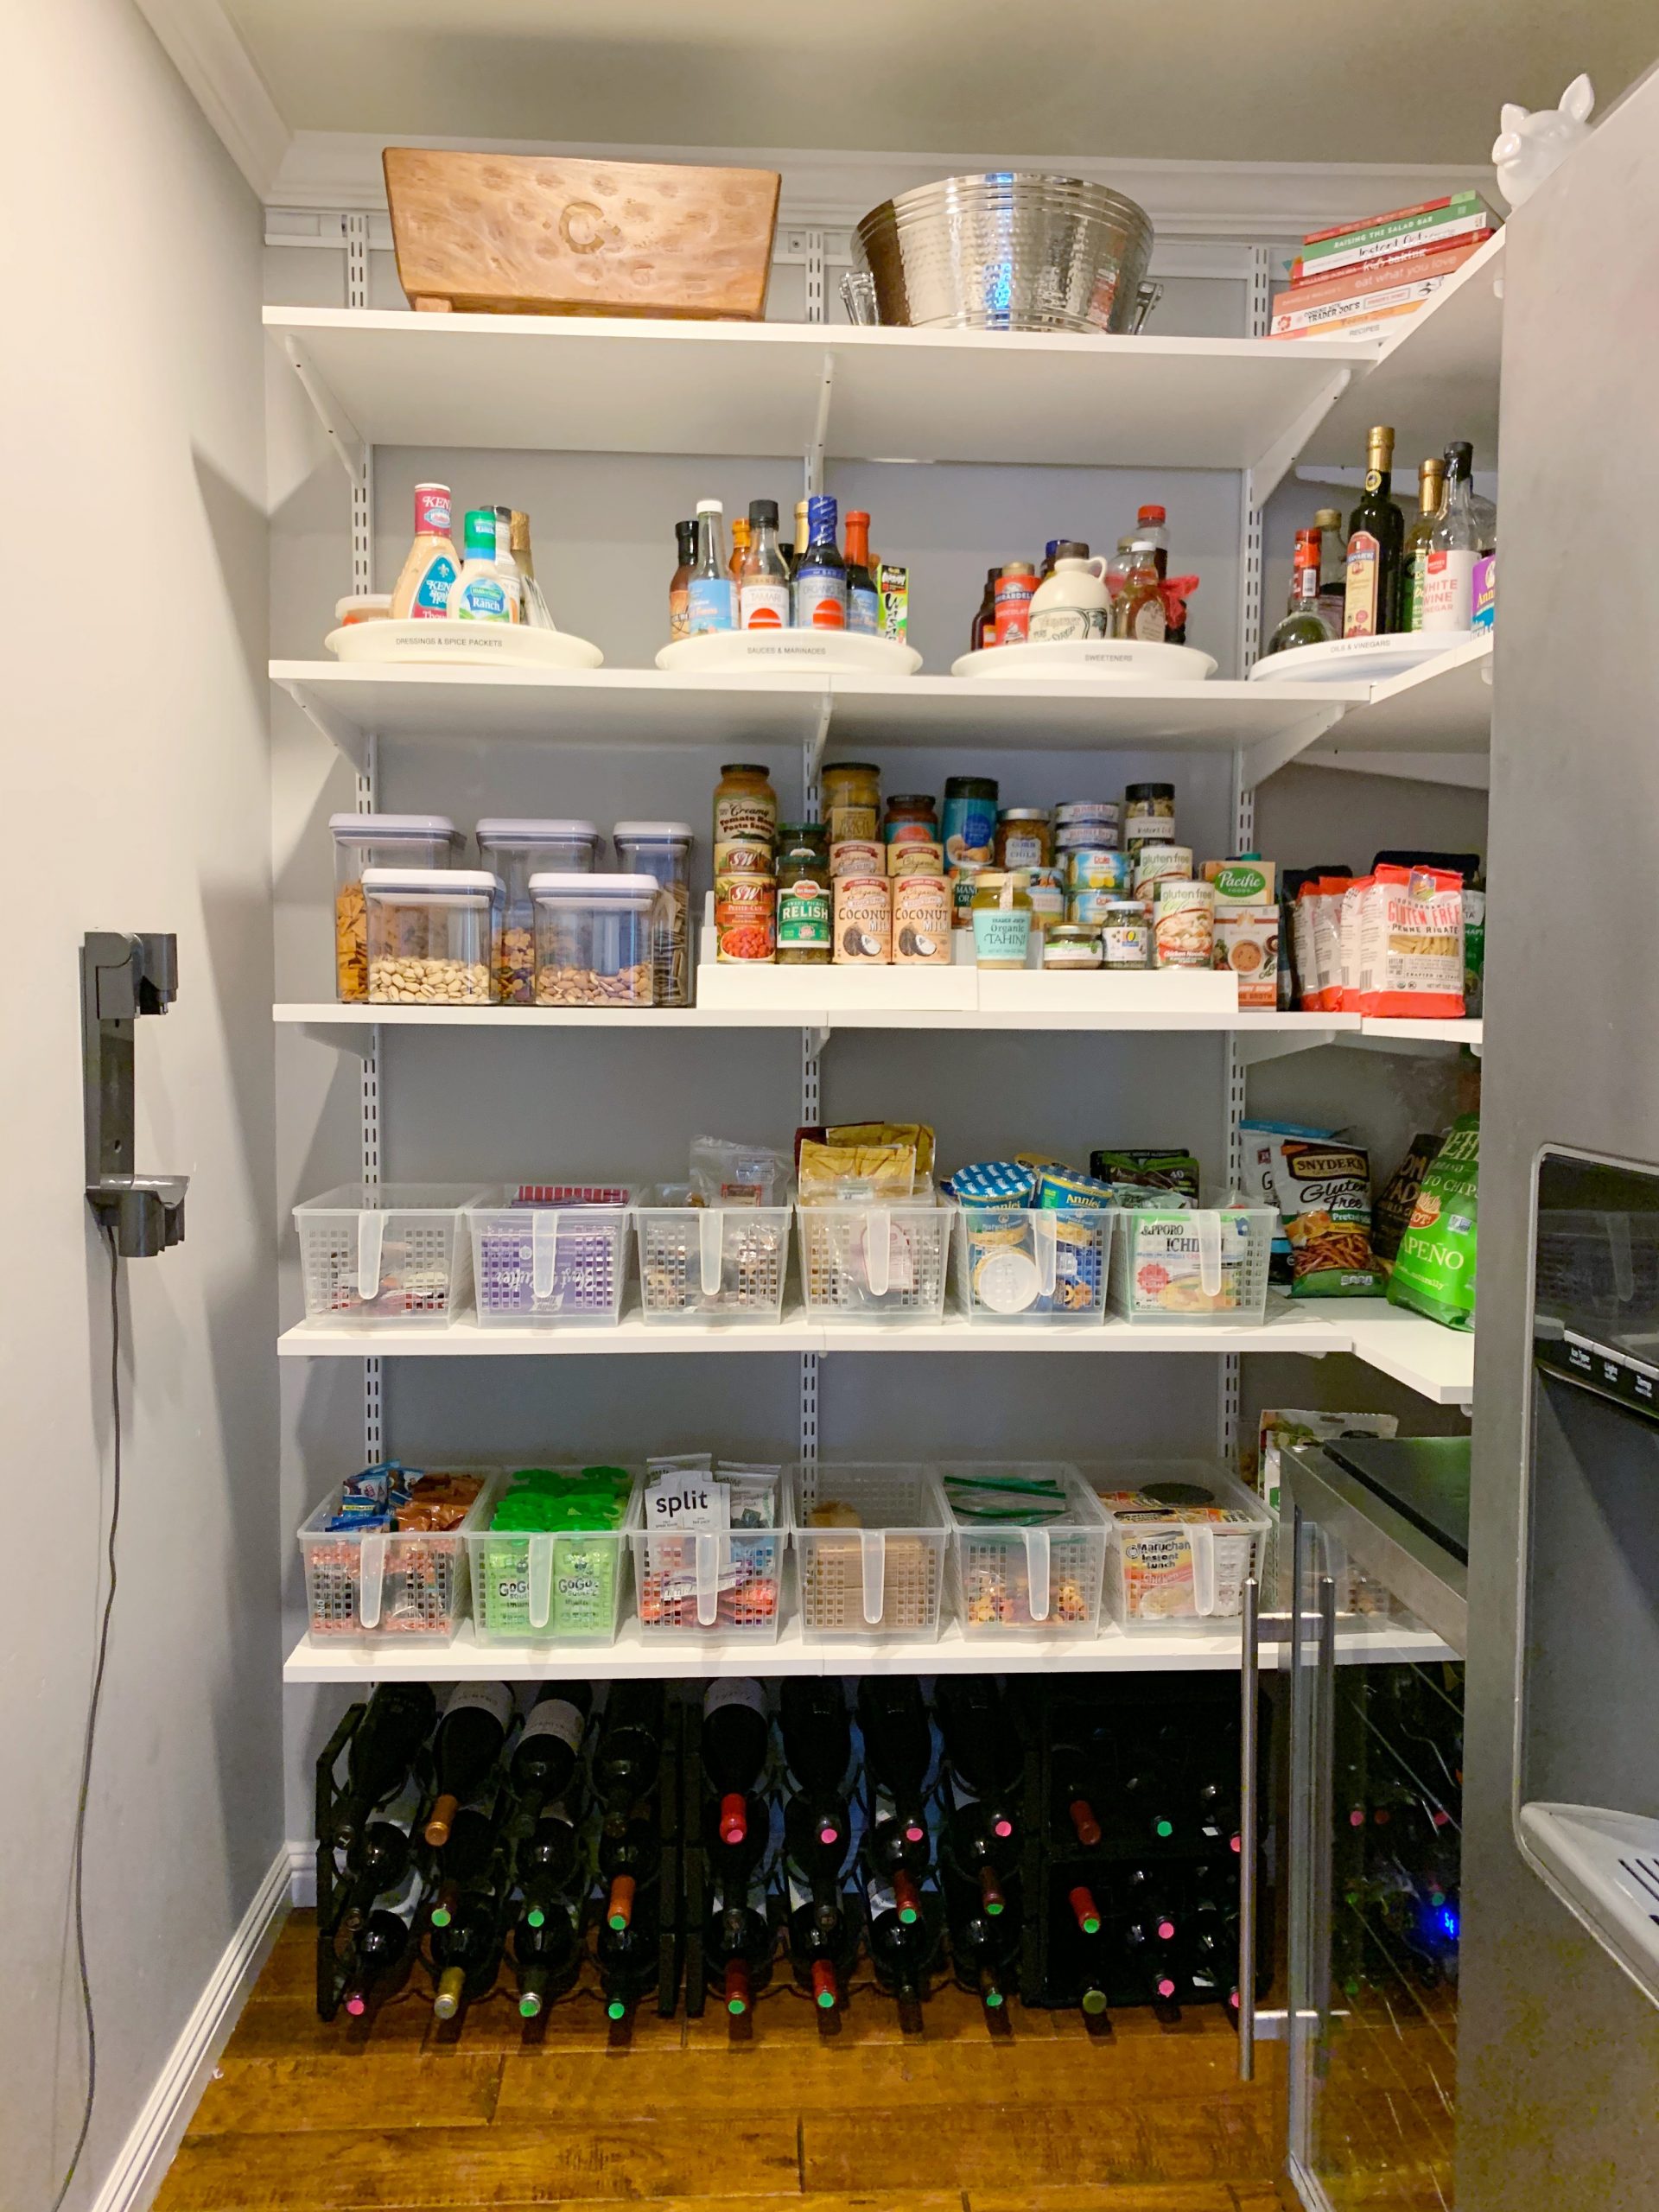 https://simplyorganized.me/wp-content/uploads/2020/01/organized-pantry-white-shelving-with-baskets-scaled.jpg